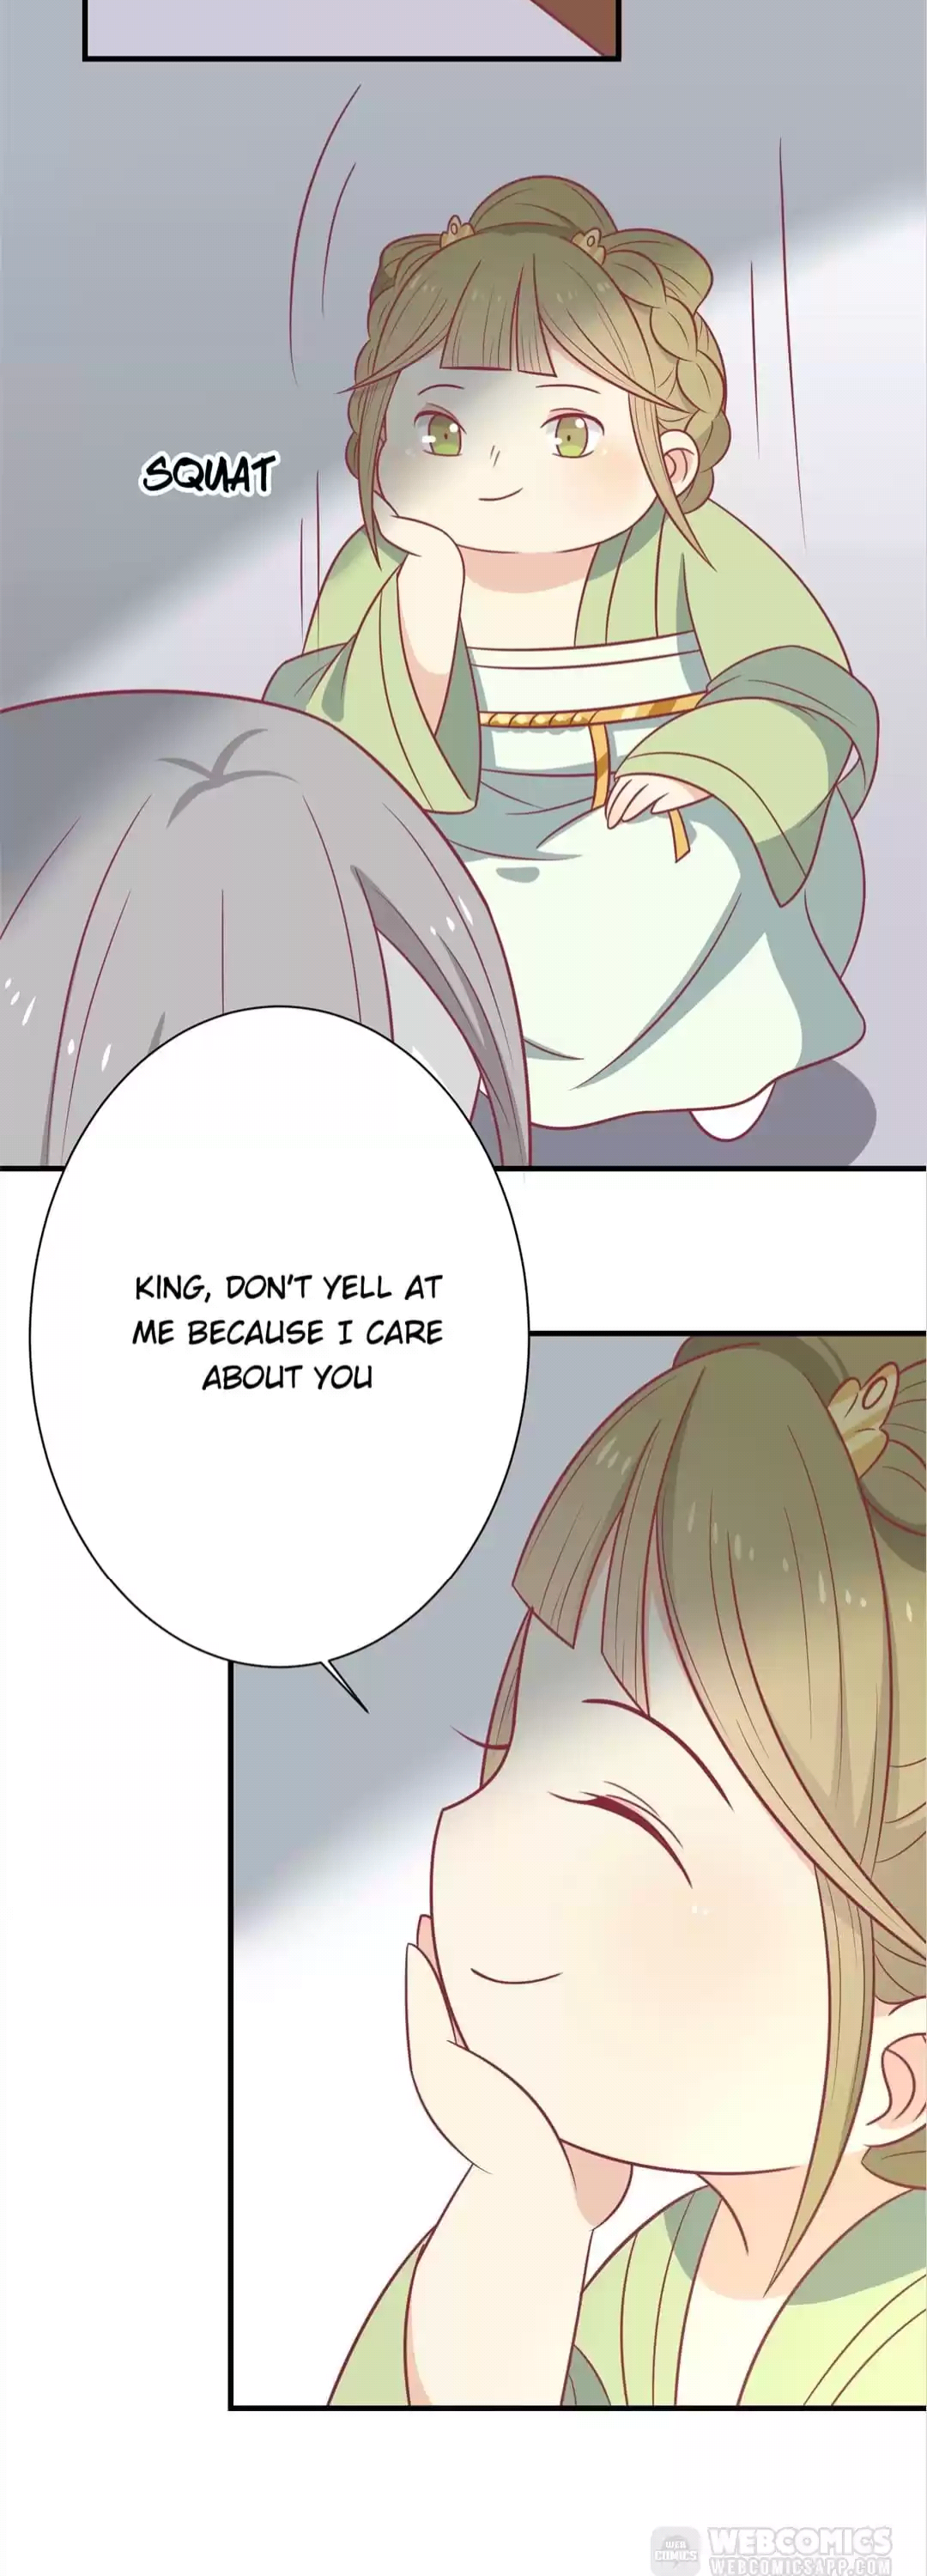 His Highness, Don't Leave! I Will Lose Weight For You! - Page 3